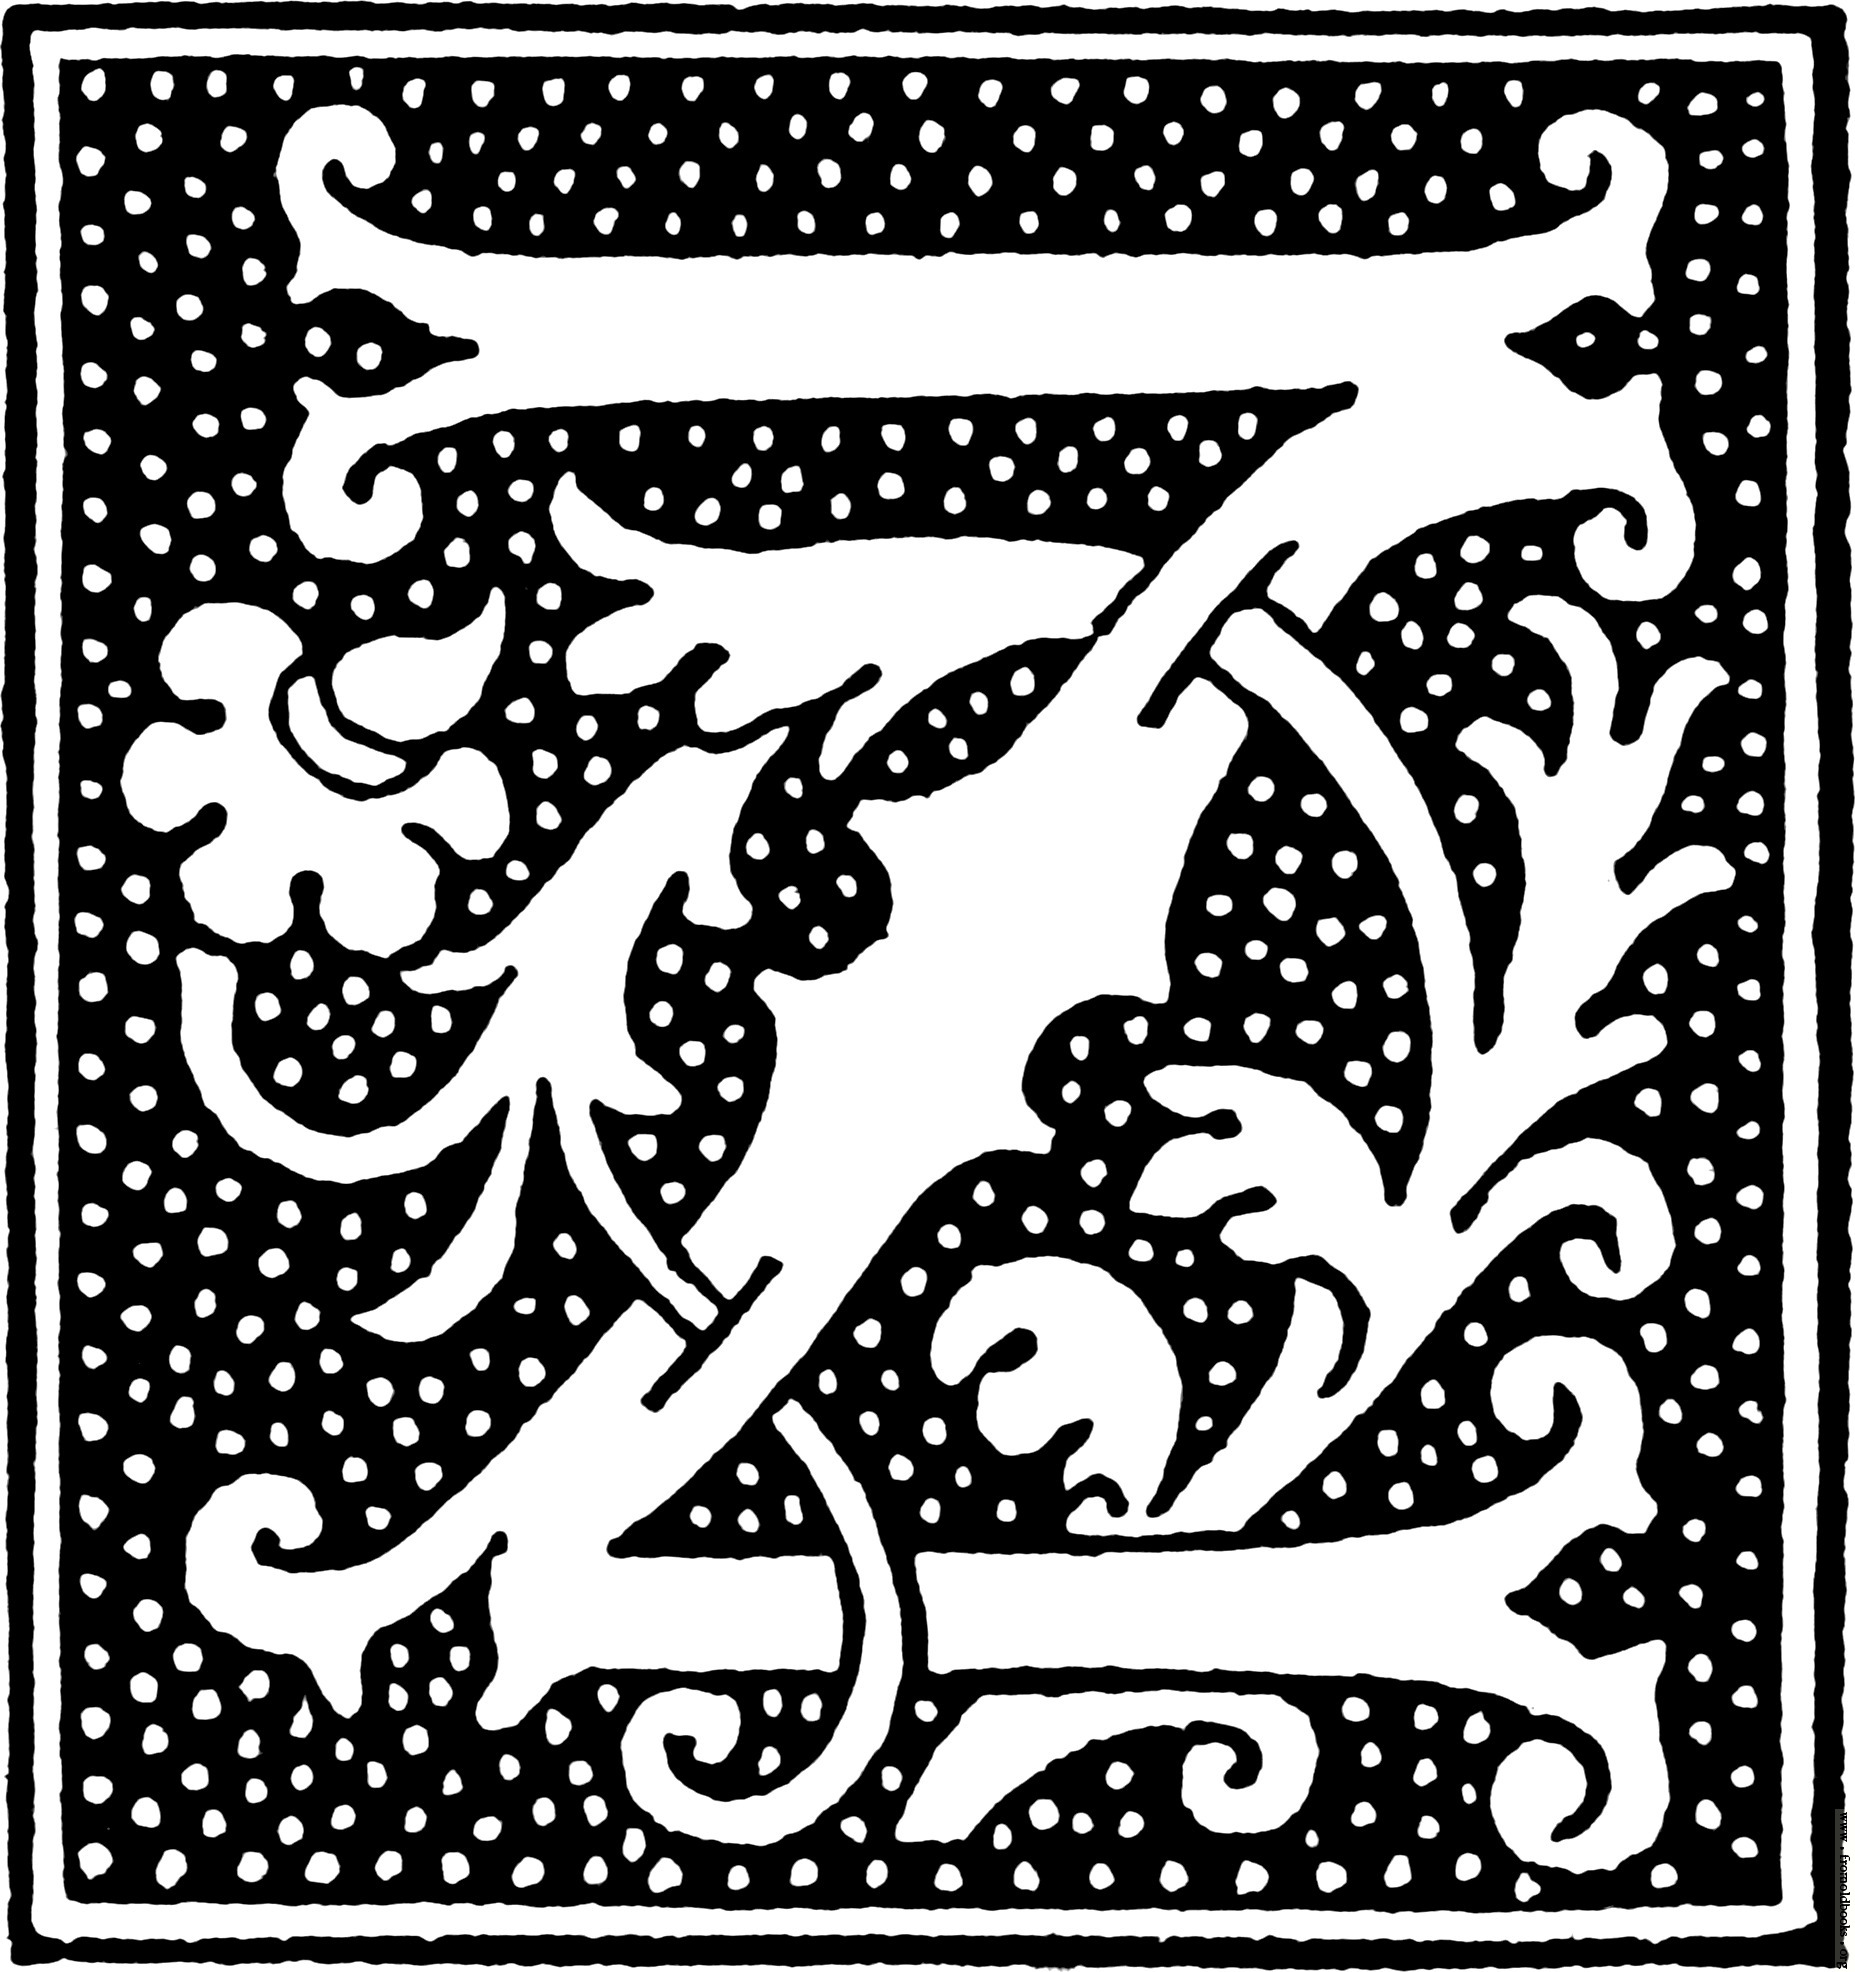 Initial Letter Z From Beginning Of The 16th Century - Initial Letter Z - HD Wallpaper 